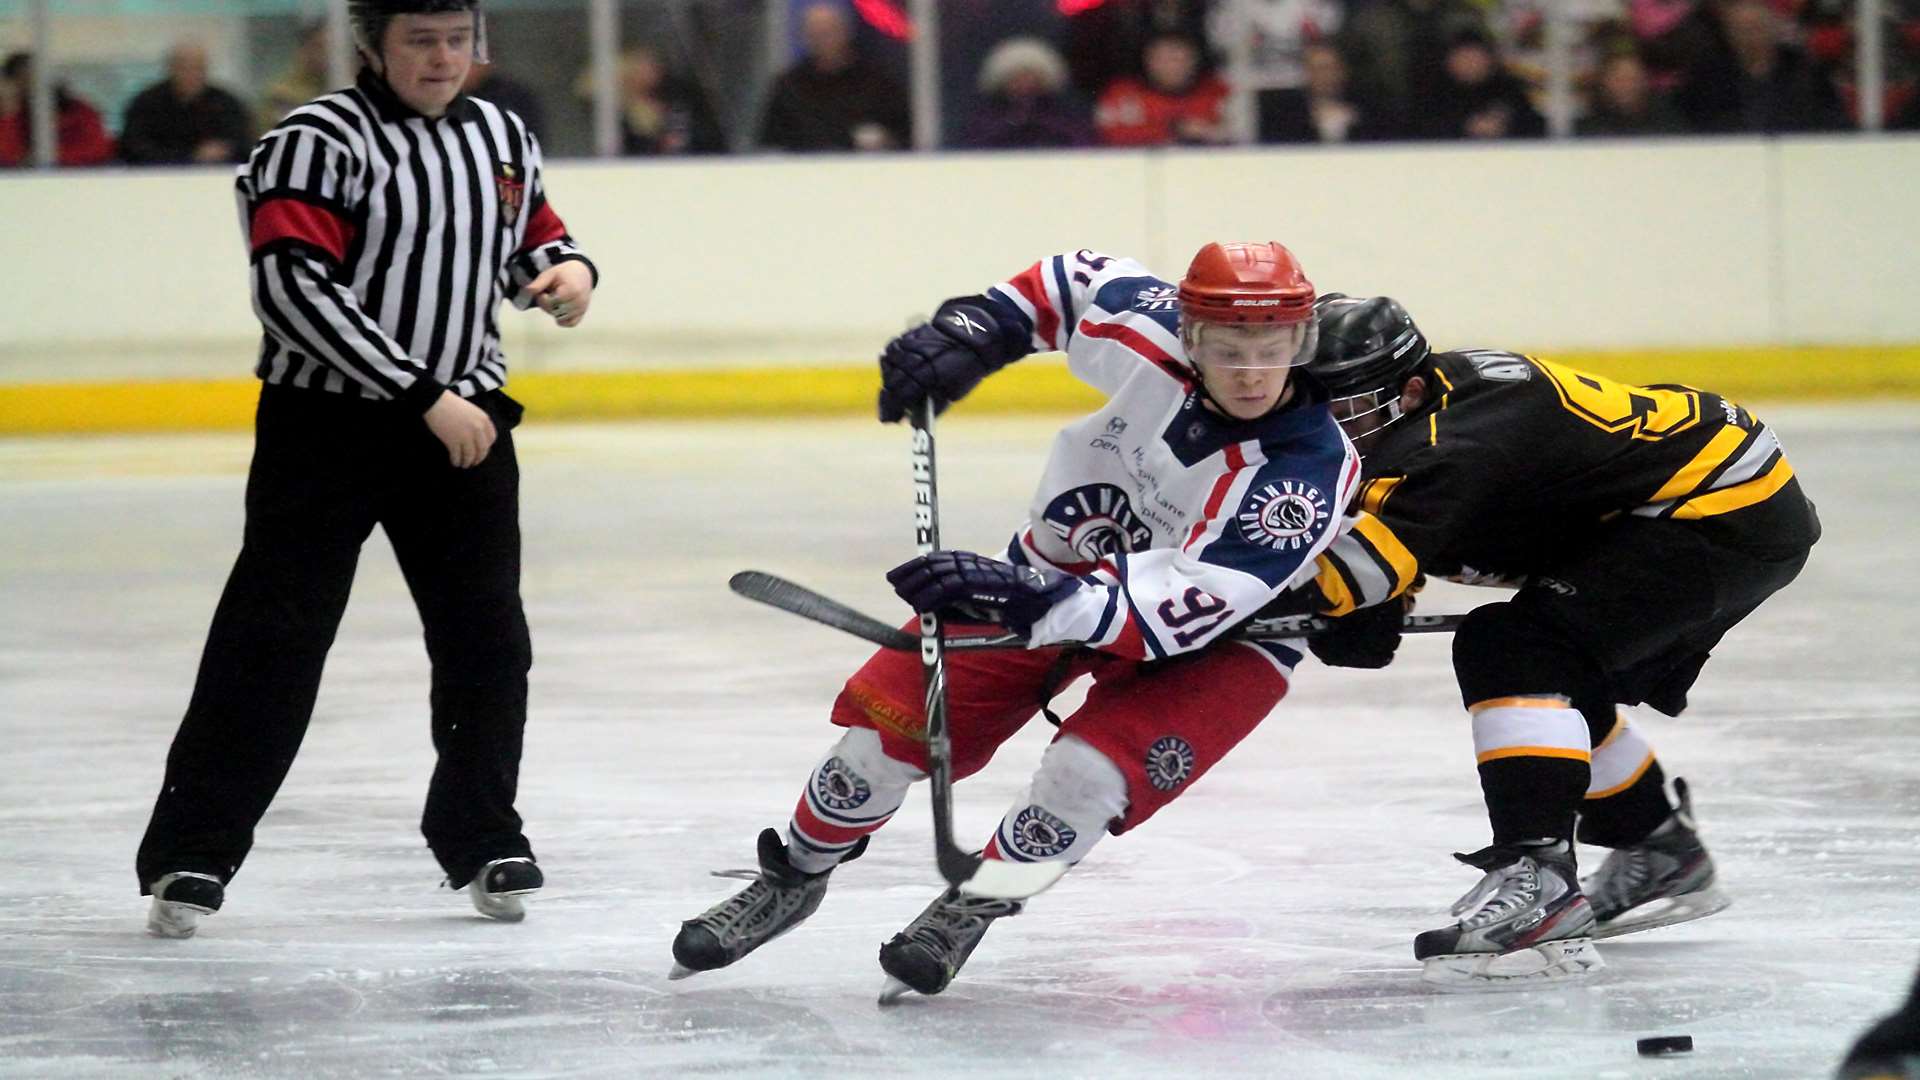 Invicta Dynamos play at Silver Blades Gilllingham, just a five minute drive off the M2